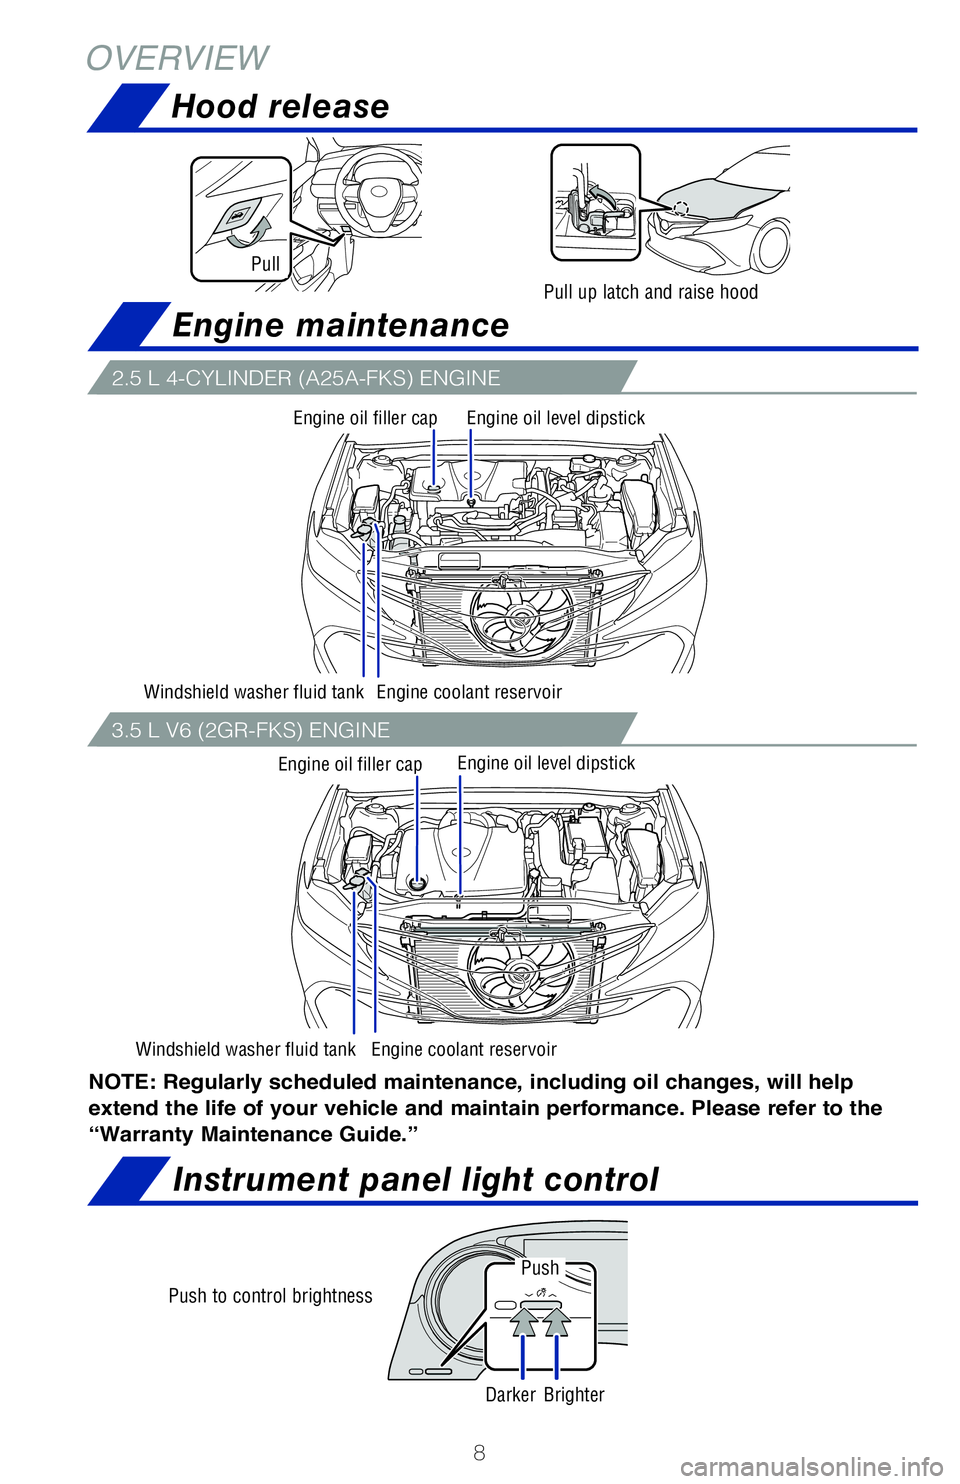 TOYOTA CAMRY 2020  Owners Manual (in English) 8
OVERVIEWHood release
Engine maintenance
Instrument panel light control
NOTE: Regularly scheduled maintenance, including oil changes, will help 
extend the life of your vehicle and maintain performan